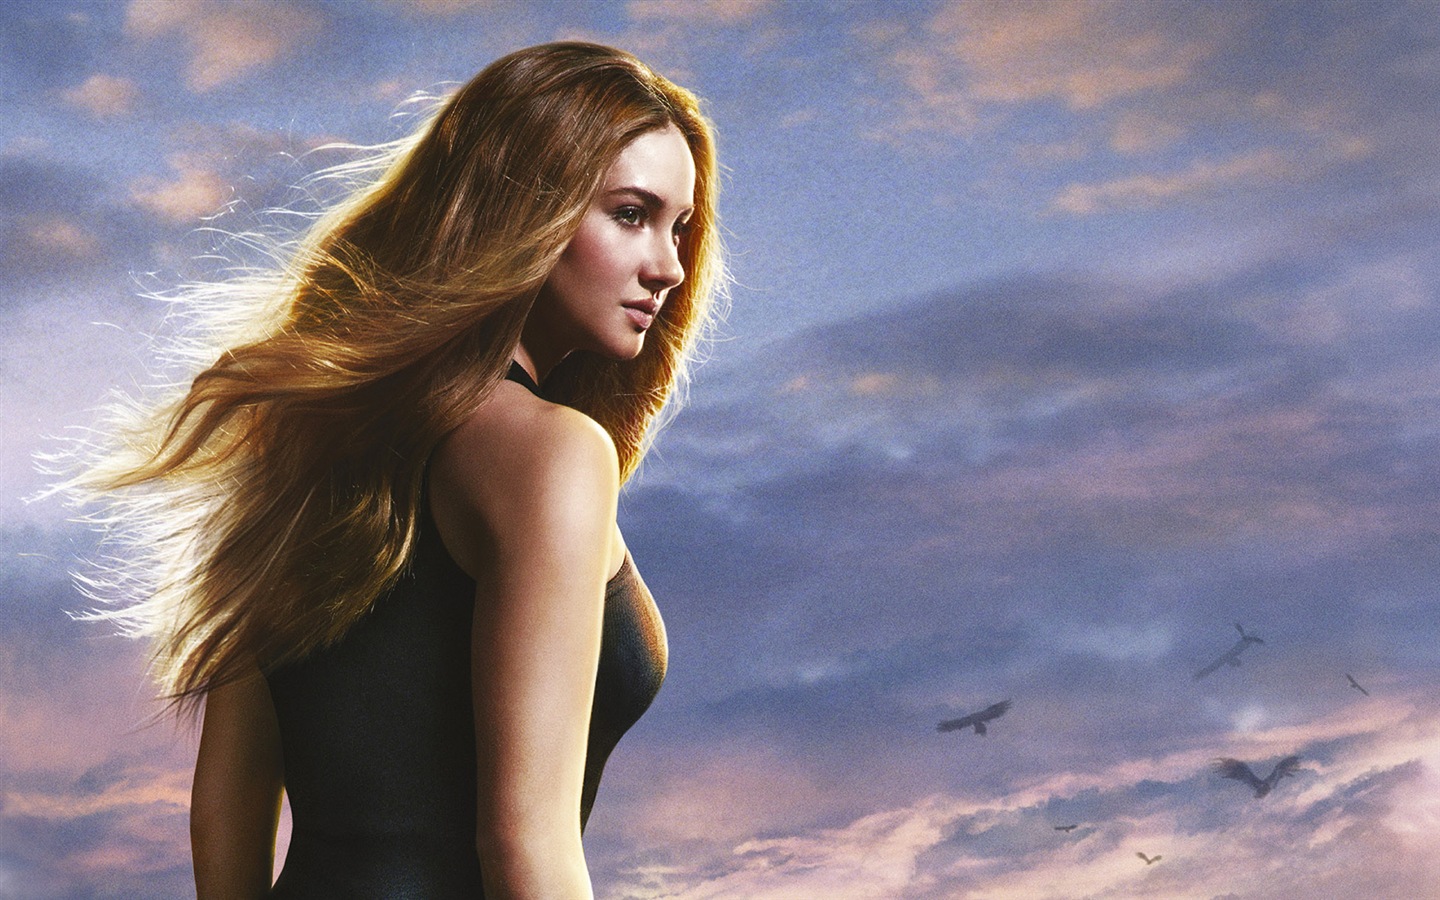 Divergent movie HD wallpapers #11 - 1440x900